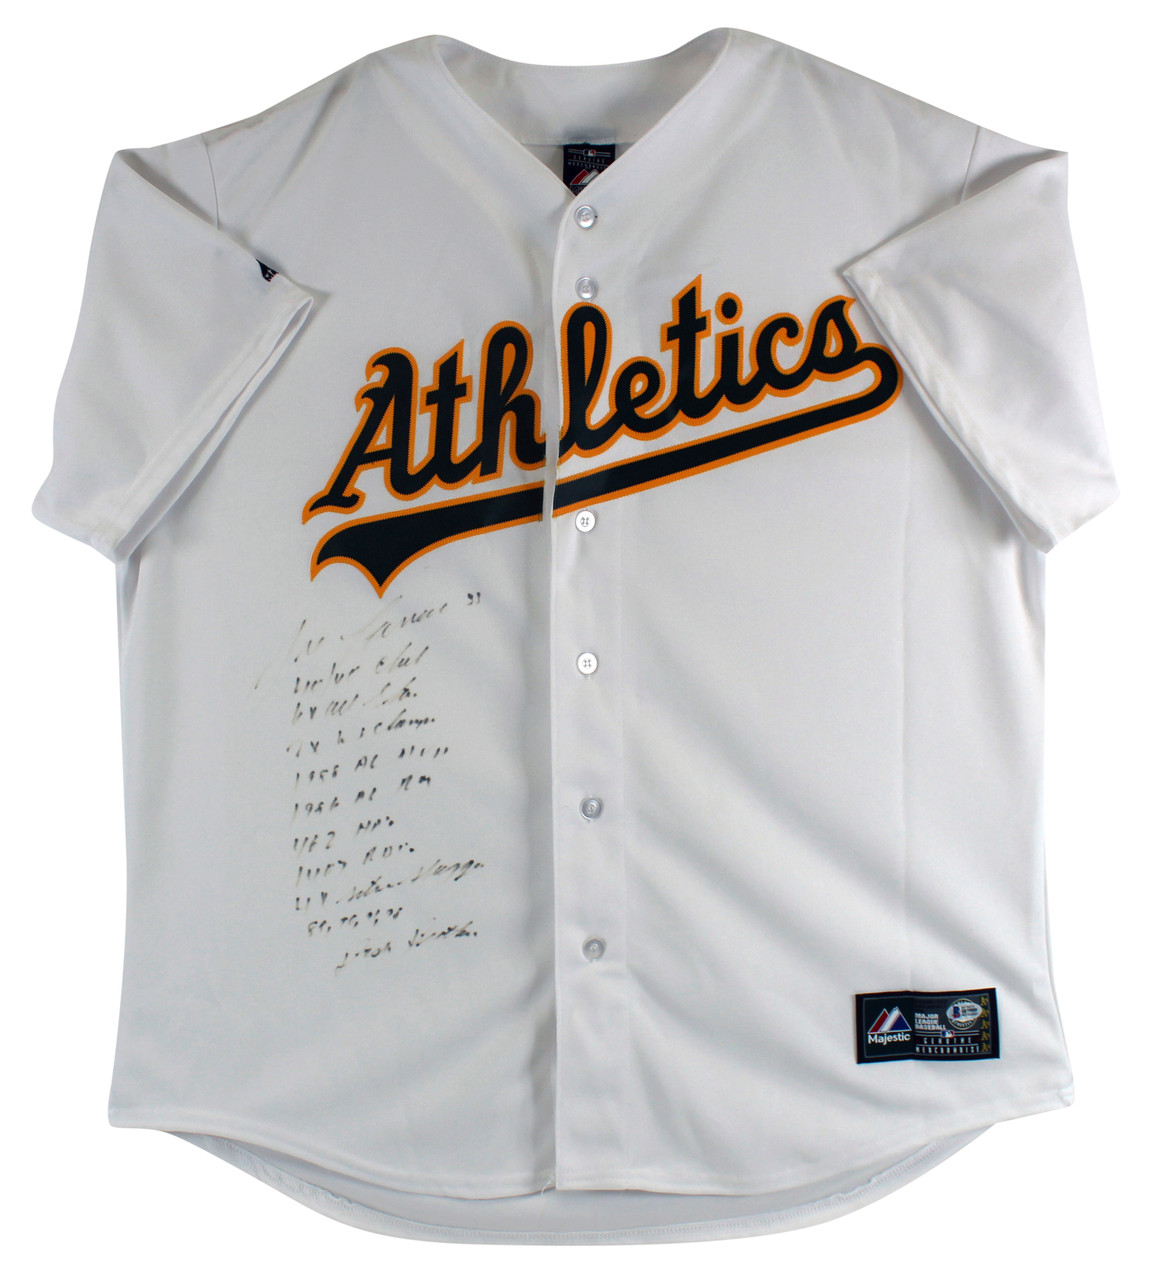 jose canseco oakland jersey